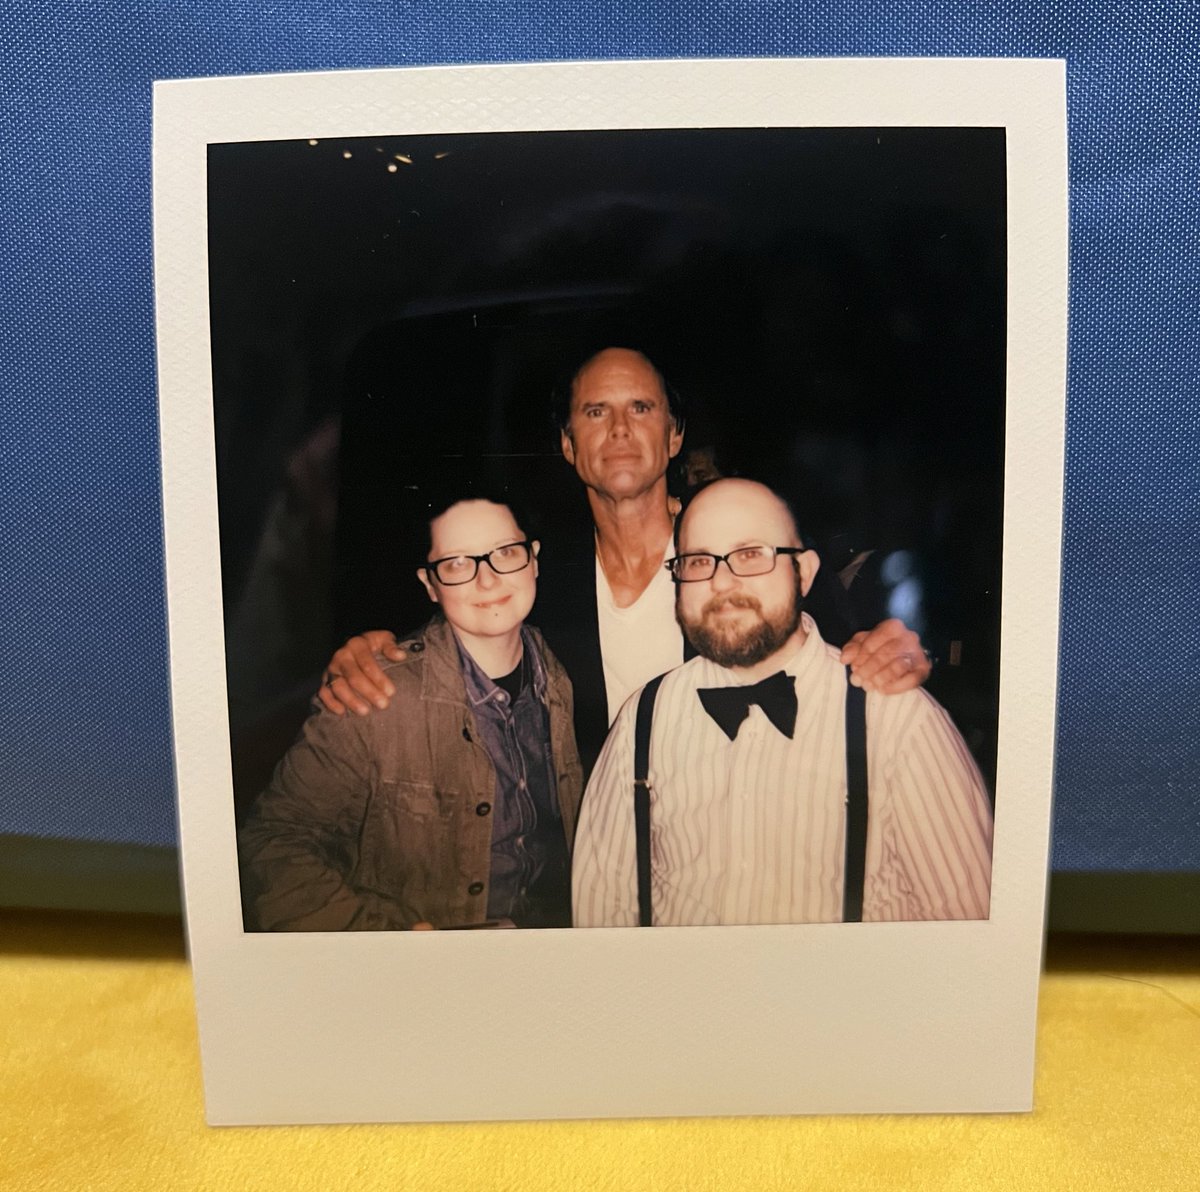 This amazing night was such a blur I forgot about this photo with Fallout’s The Ghoul/Walton Goggins, myself & my husband @MisterFallout! I am forever grateful to have had this incredible experience, memories & these photos to look back on🥰 #FalloutonPrime #Fallout #mrsfallout